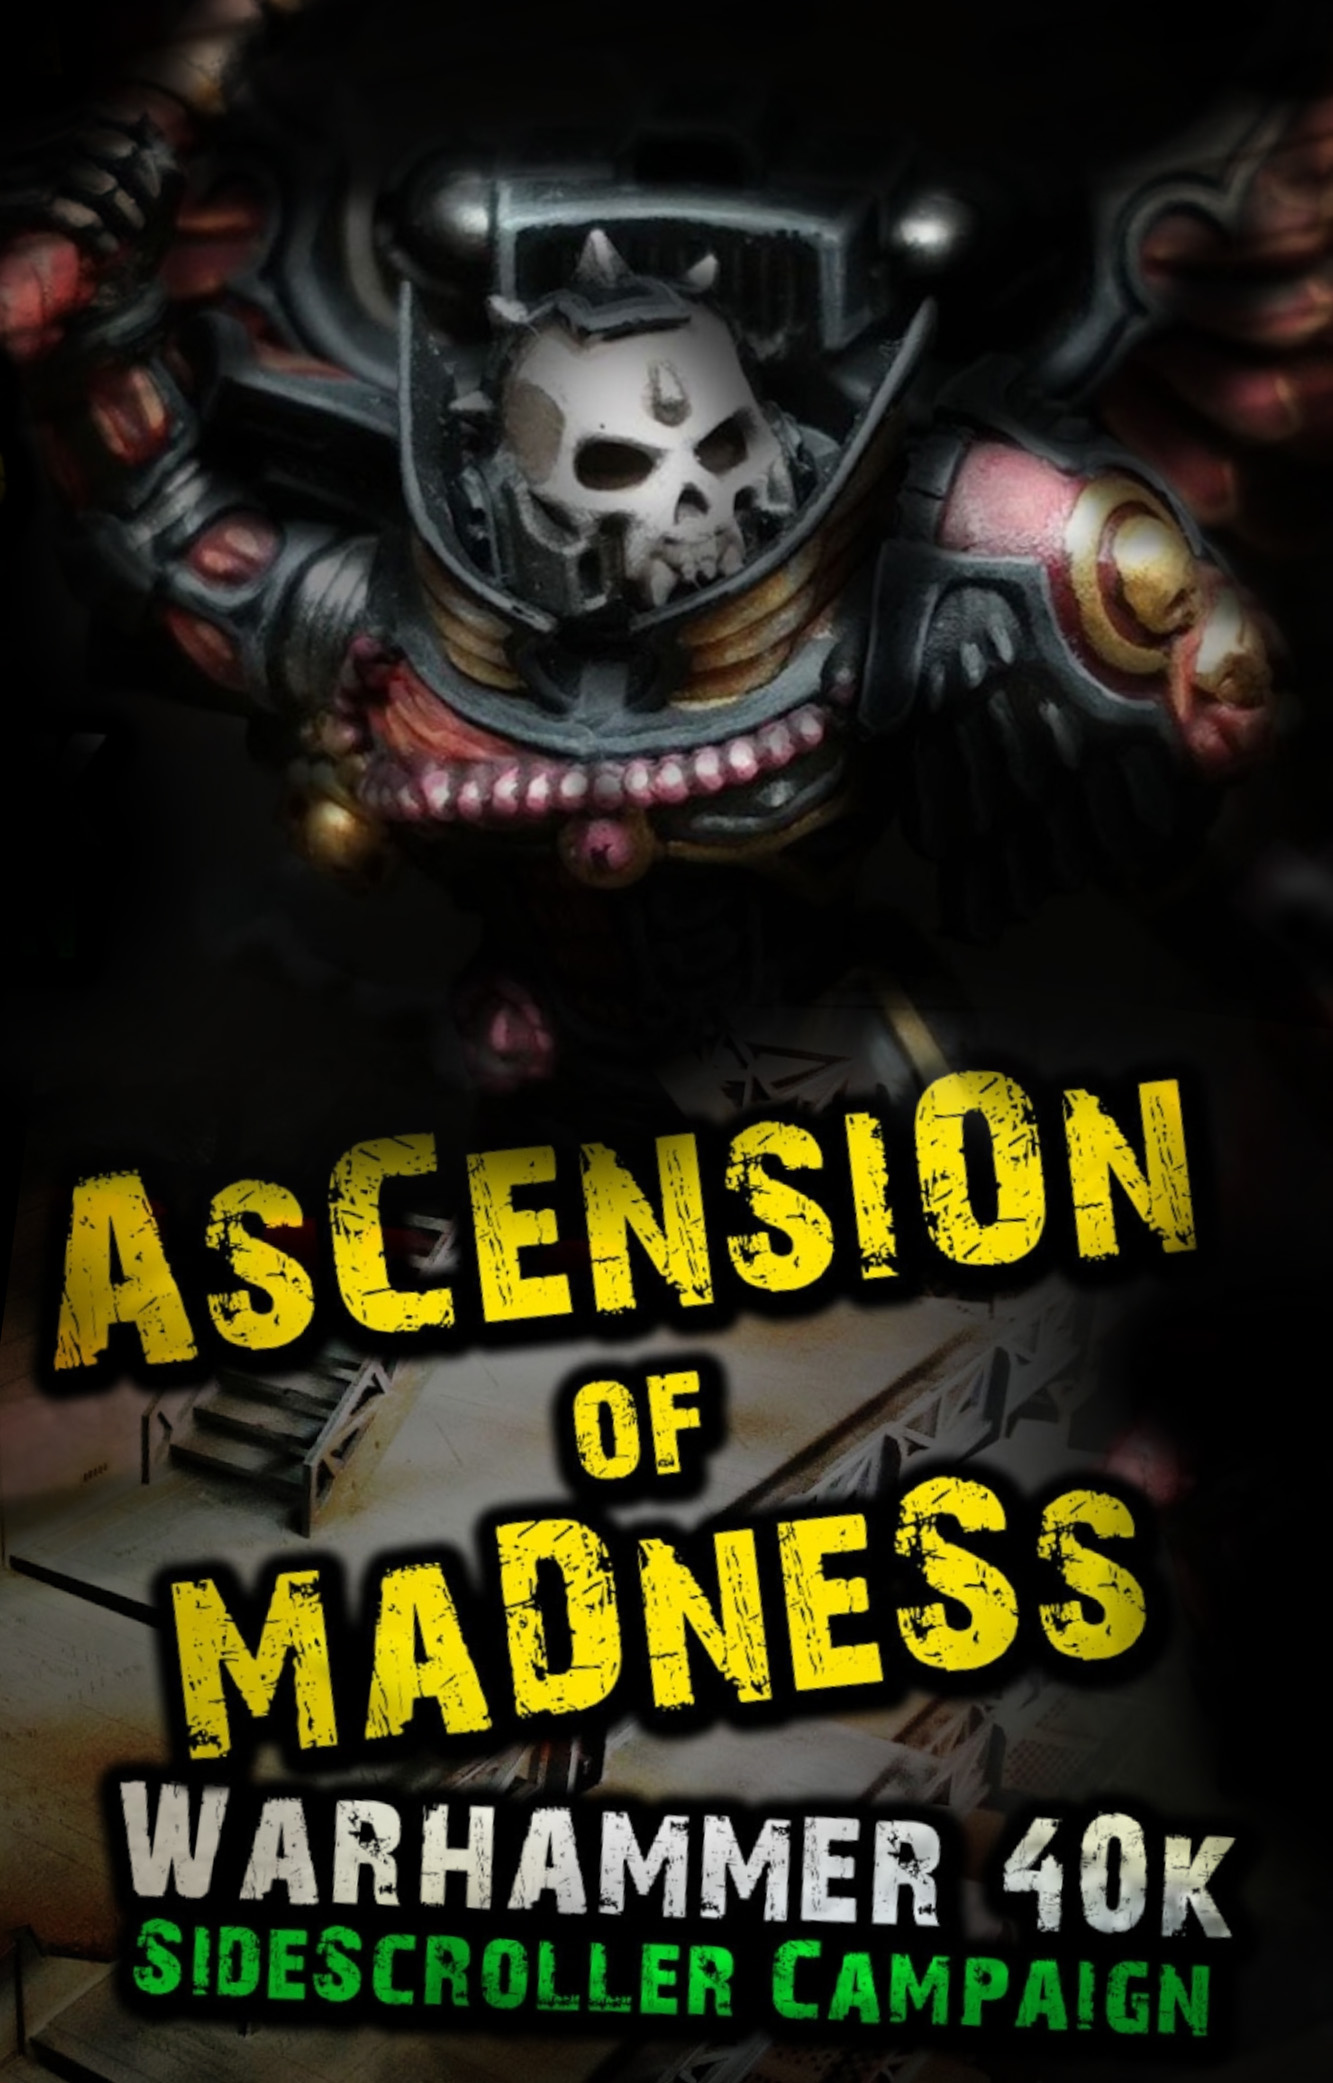 Blood Angels vs Chaos Warhammer 40k Narrative Campaign - Ascension of Madness Introduction